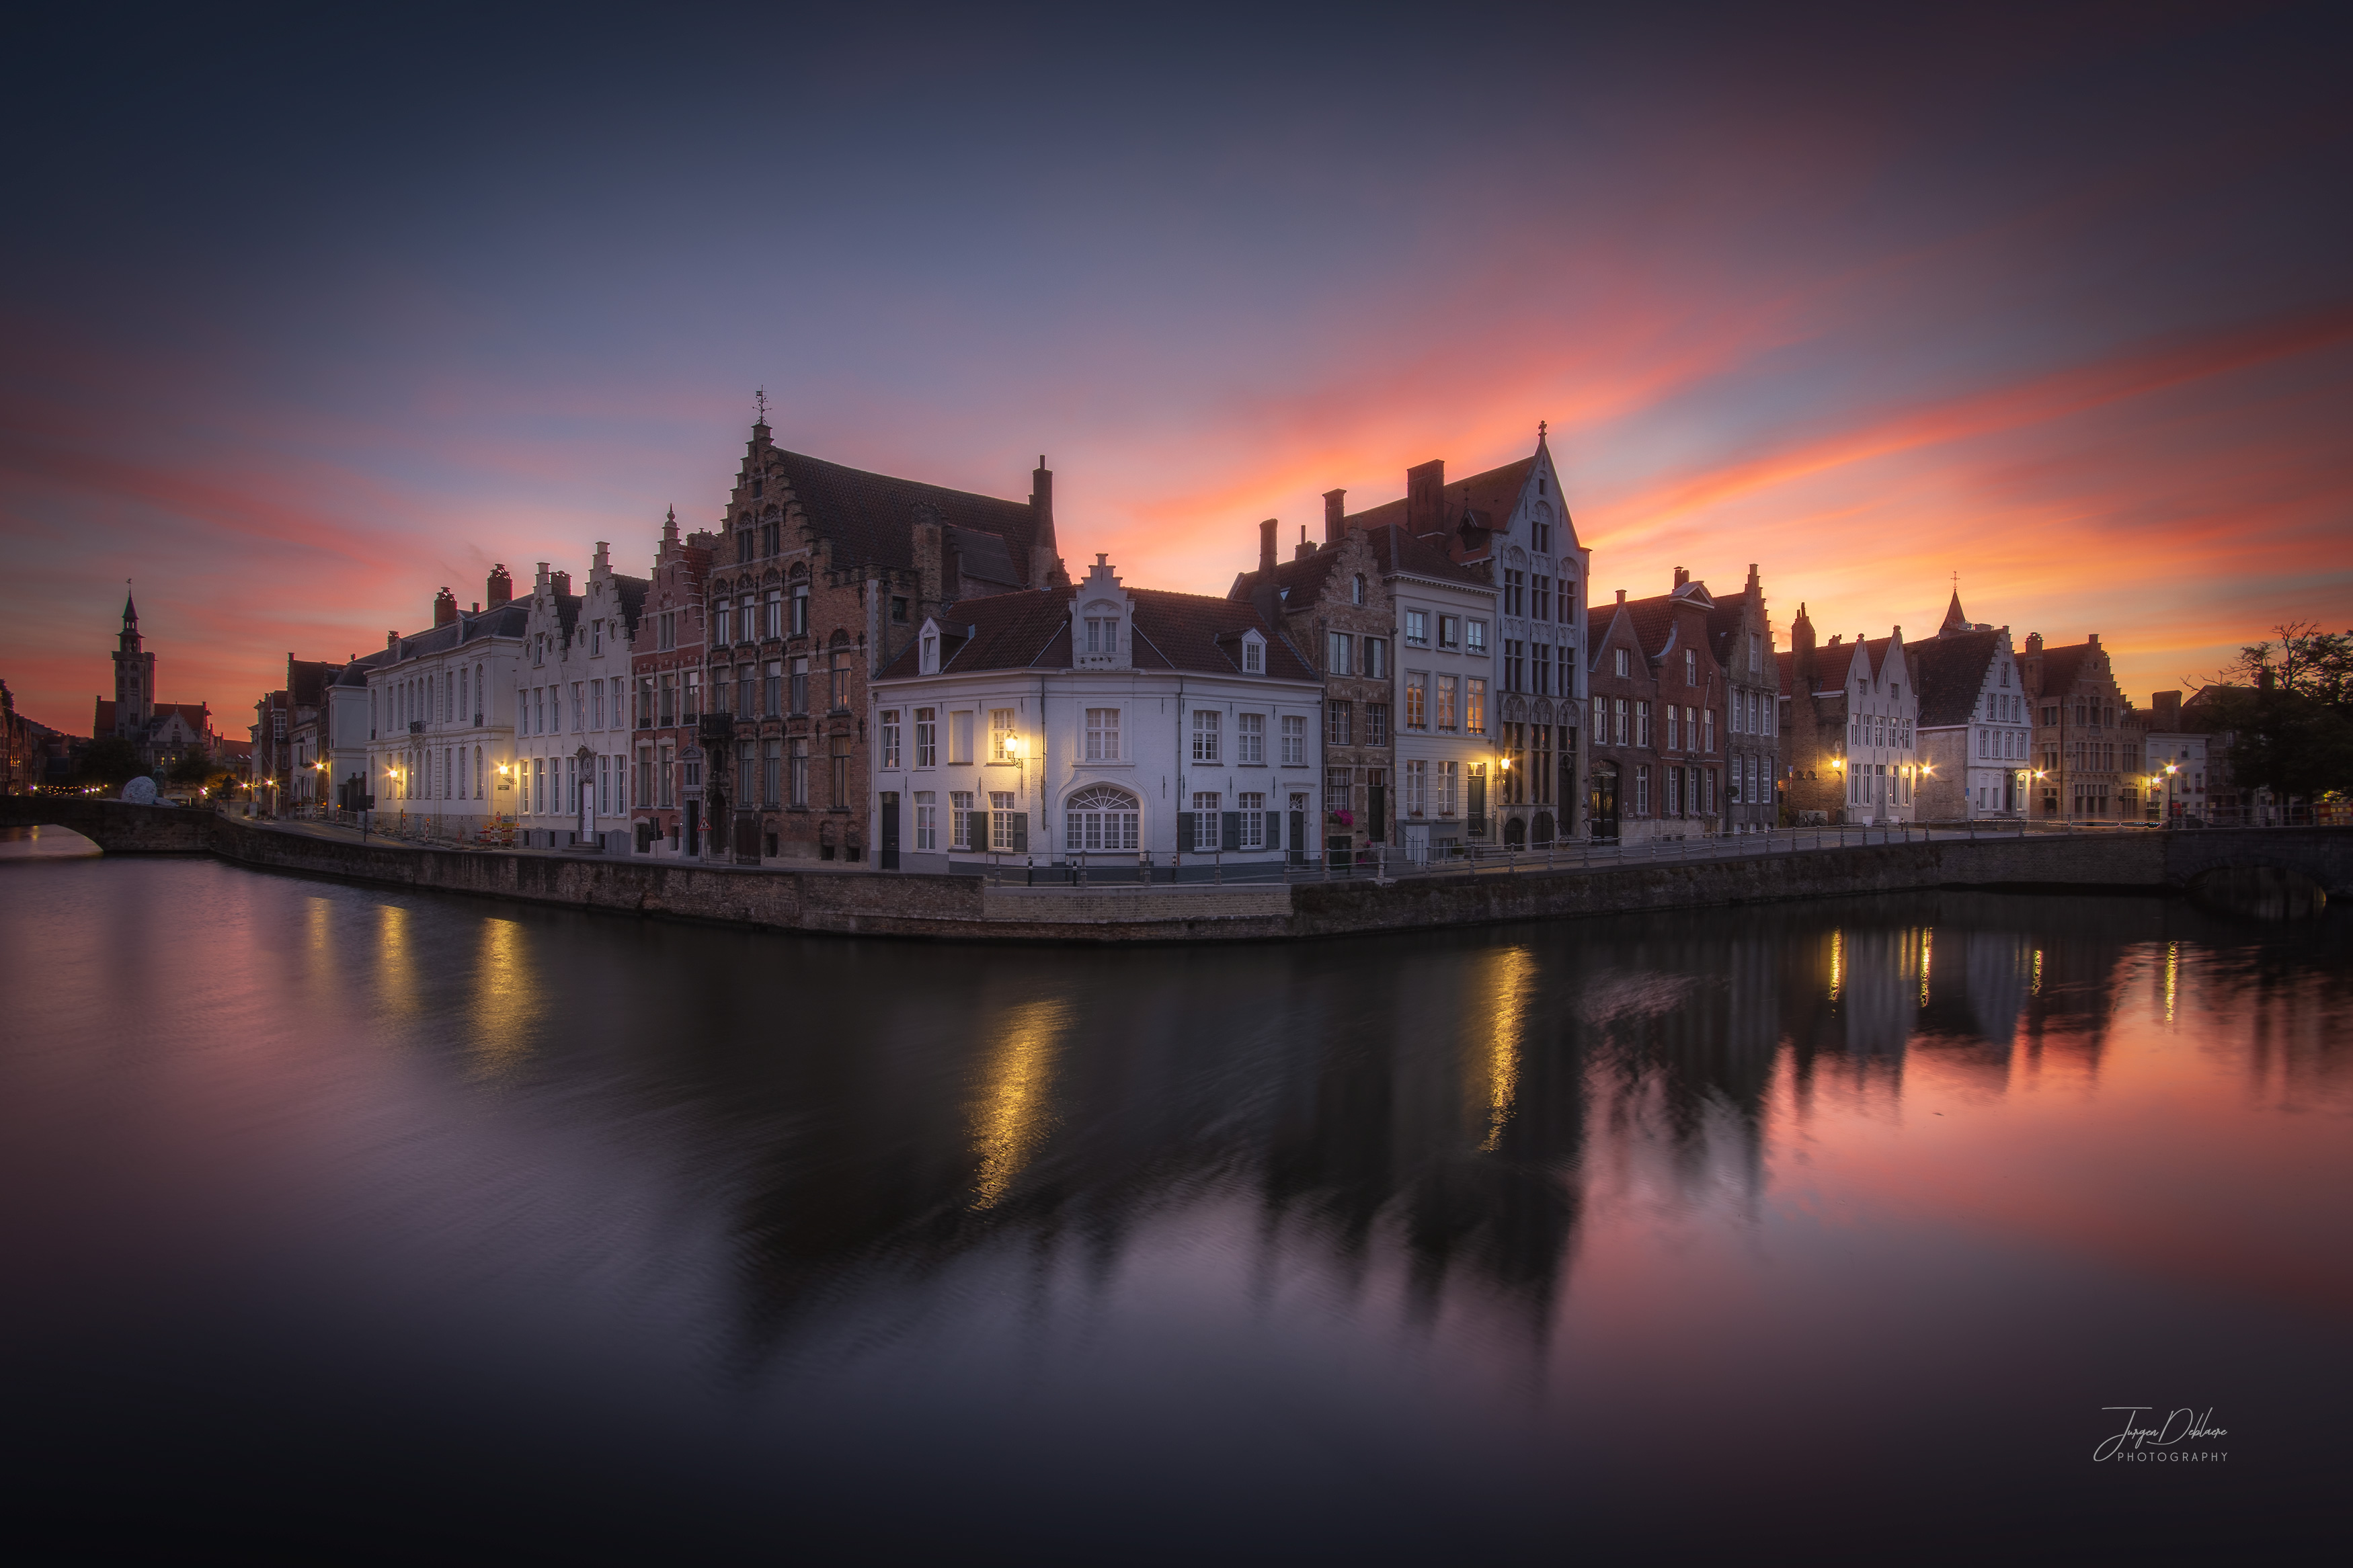 Evening colors from Bruges.